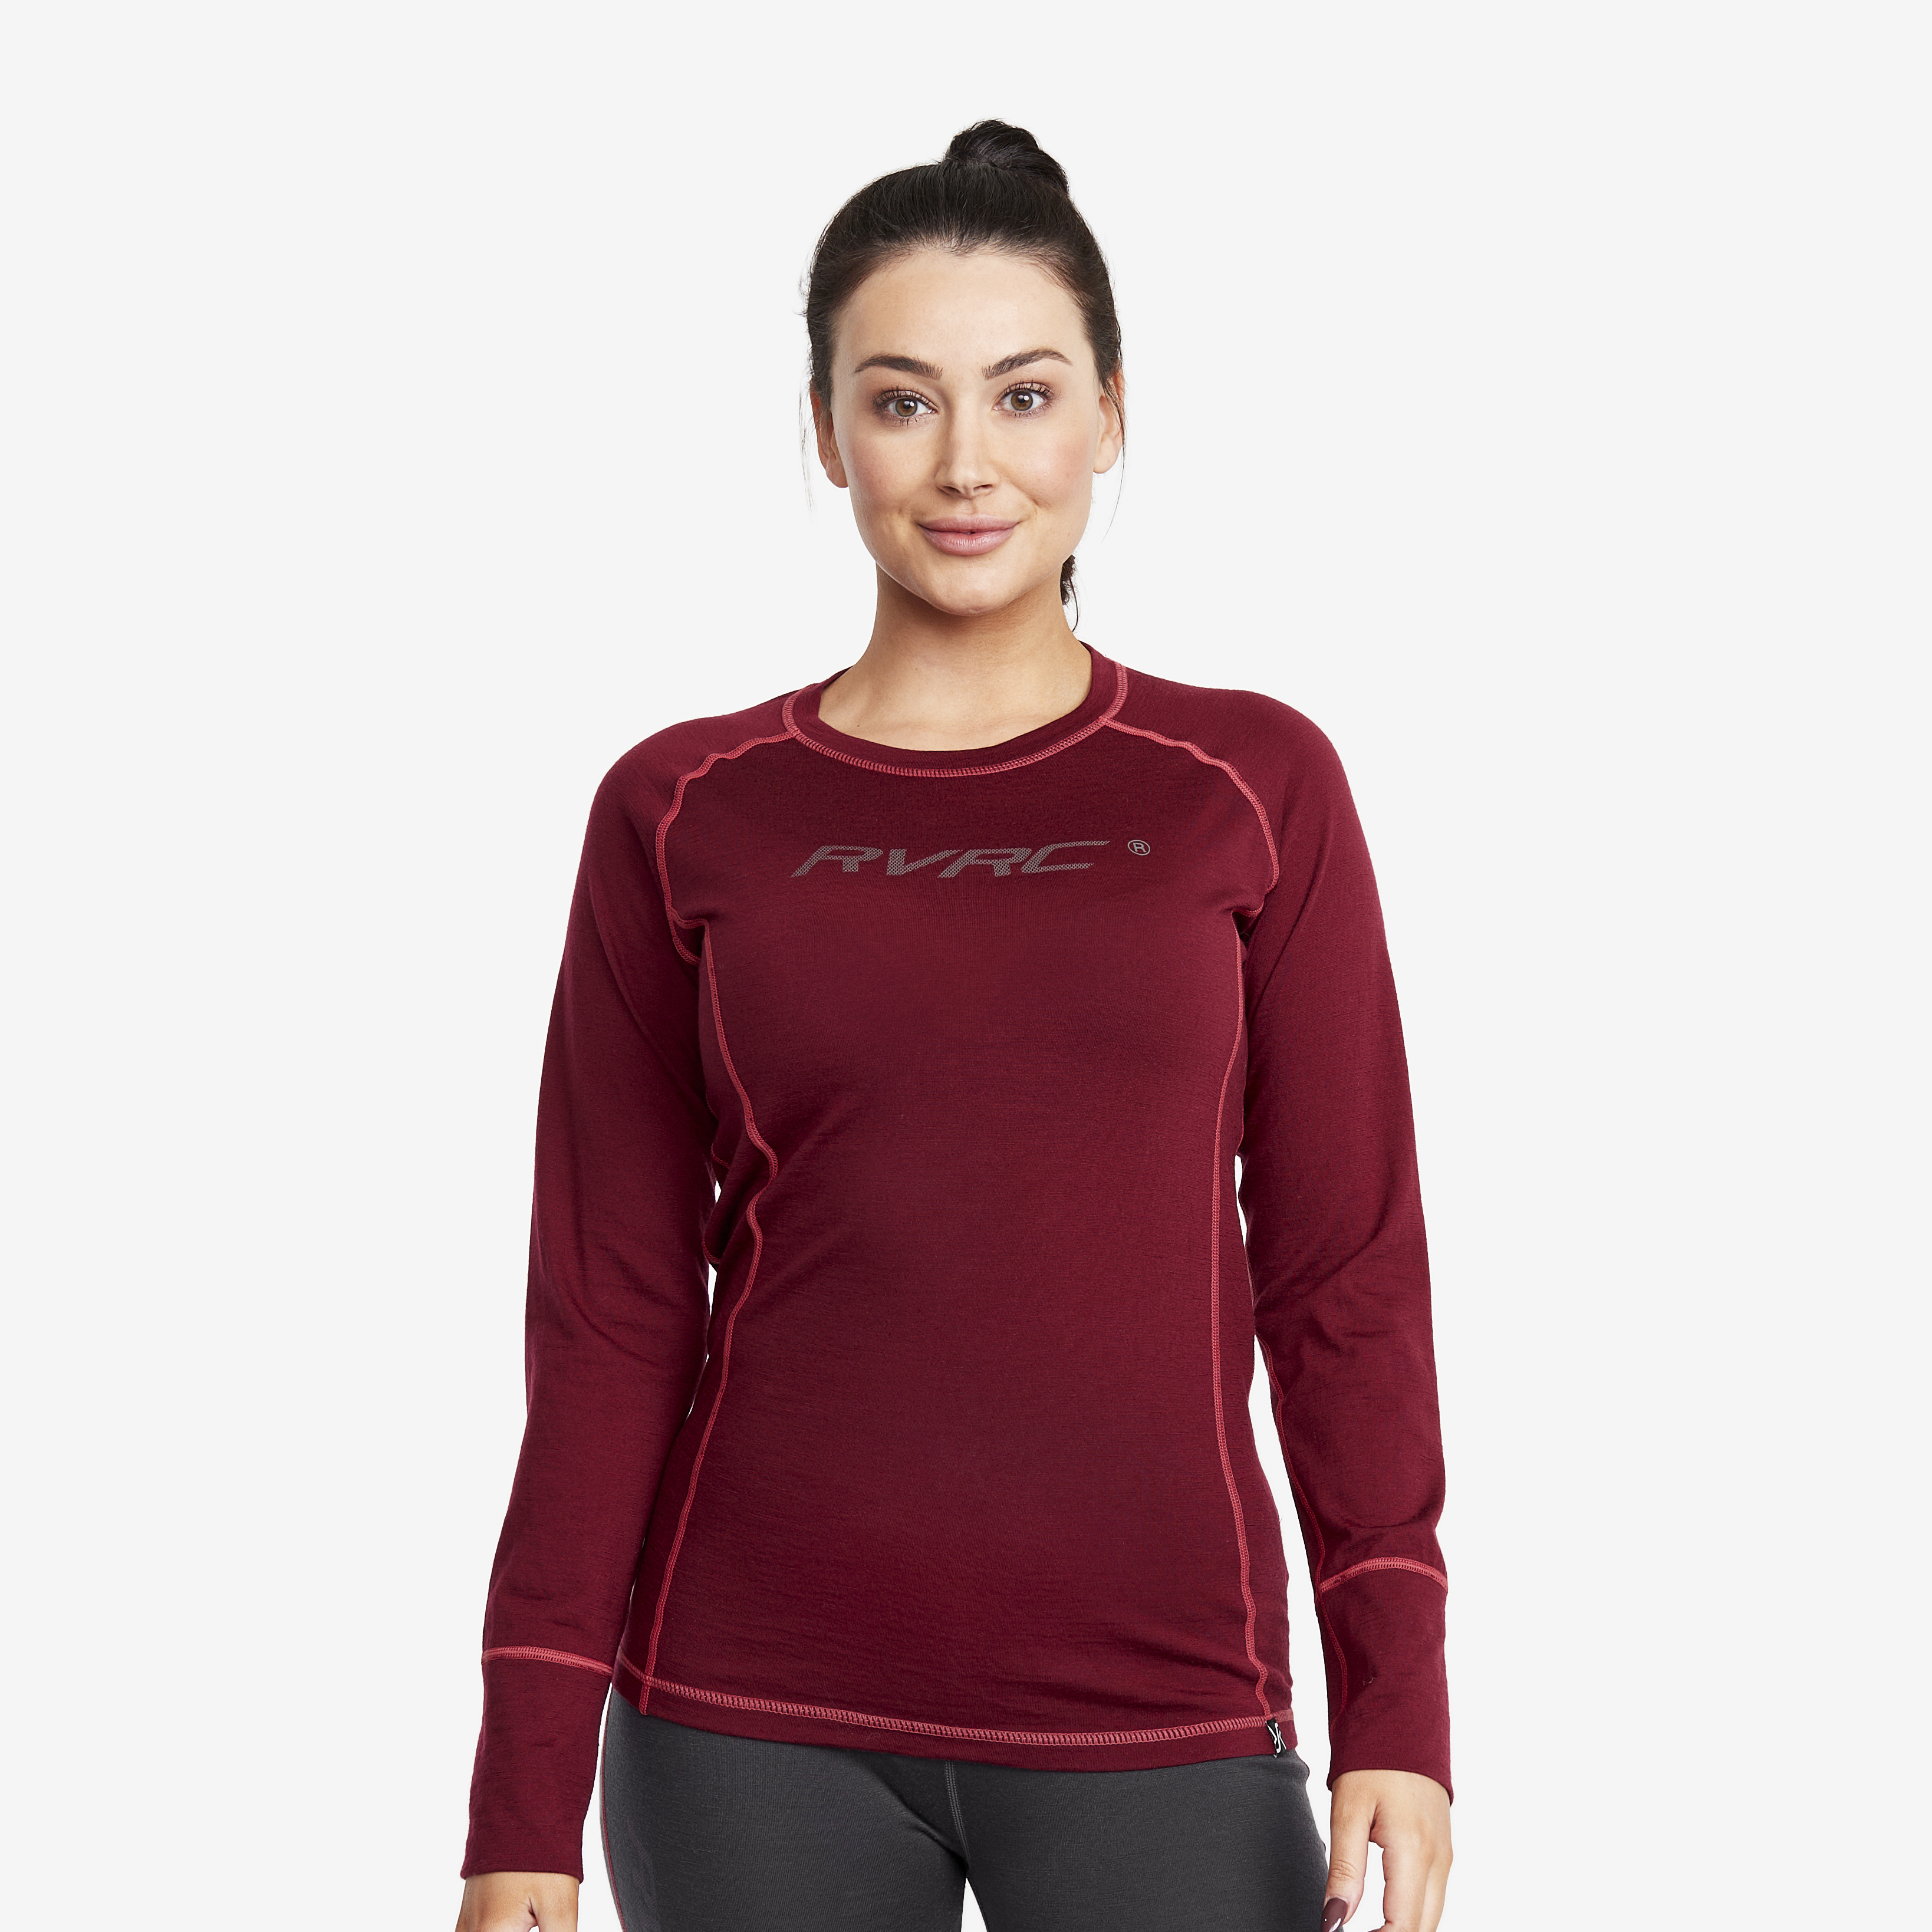 Outright Merino Top Bison Red/ Anthracite Damskie